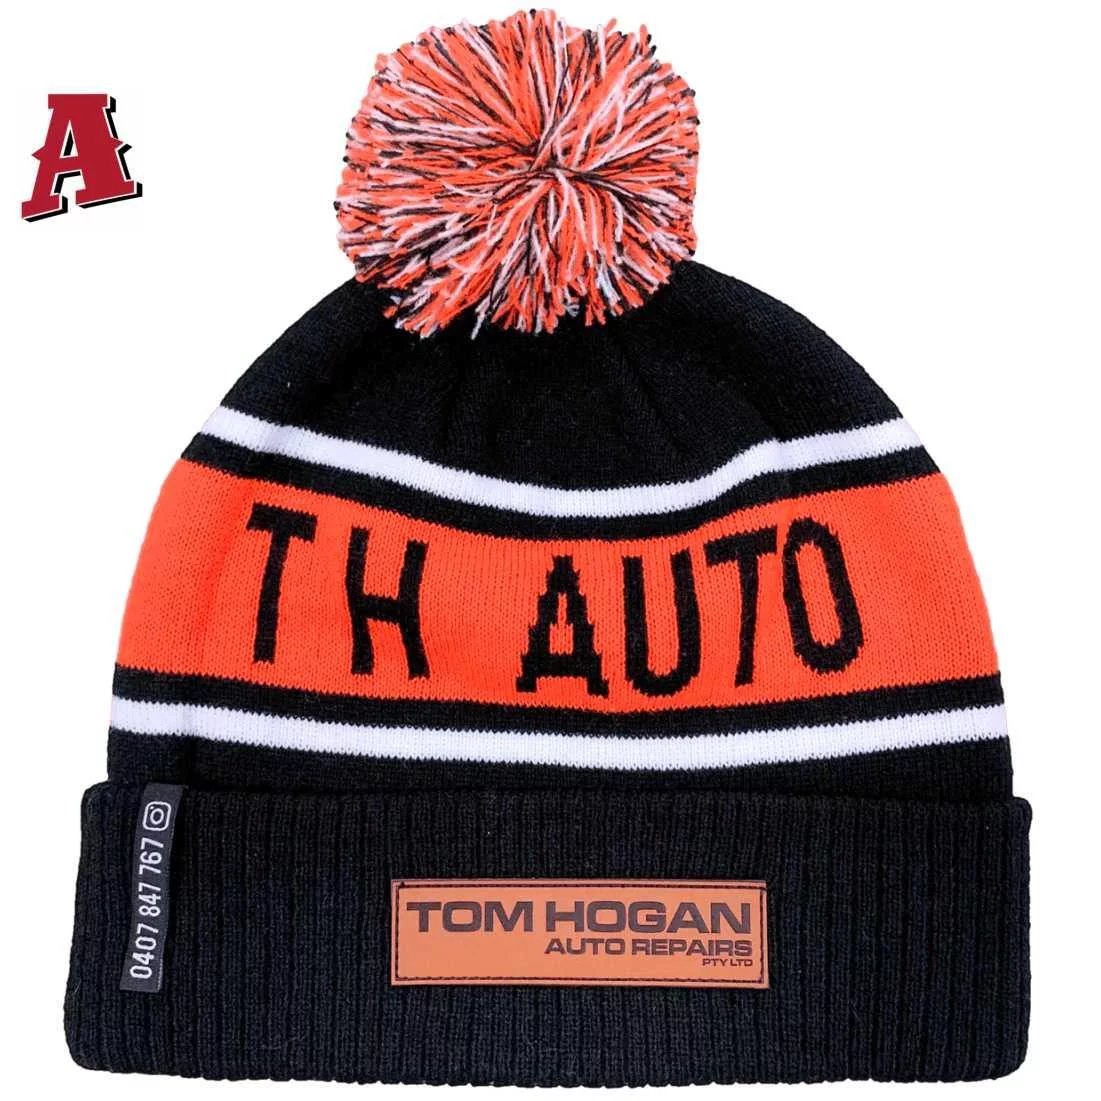 Tom Hogan Auto Repairs Kialla West Victoria Aussie Acrylic Beanie One Size Fits All with Pom Pom and Roll-up Ribbed Cuff Black Orange White